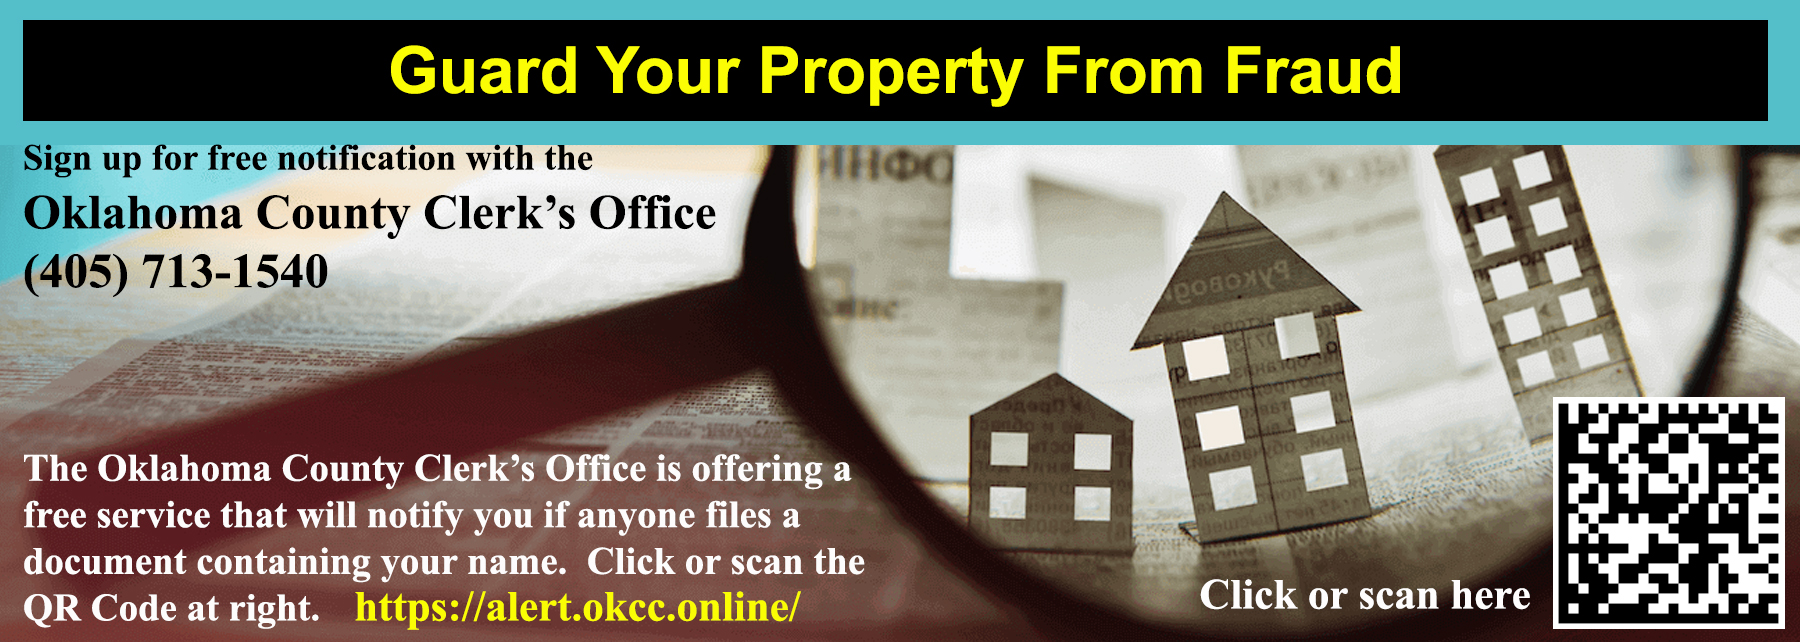 Guard Your Property from Fraud banner image